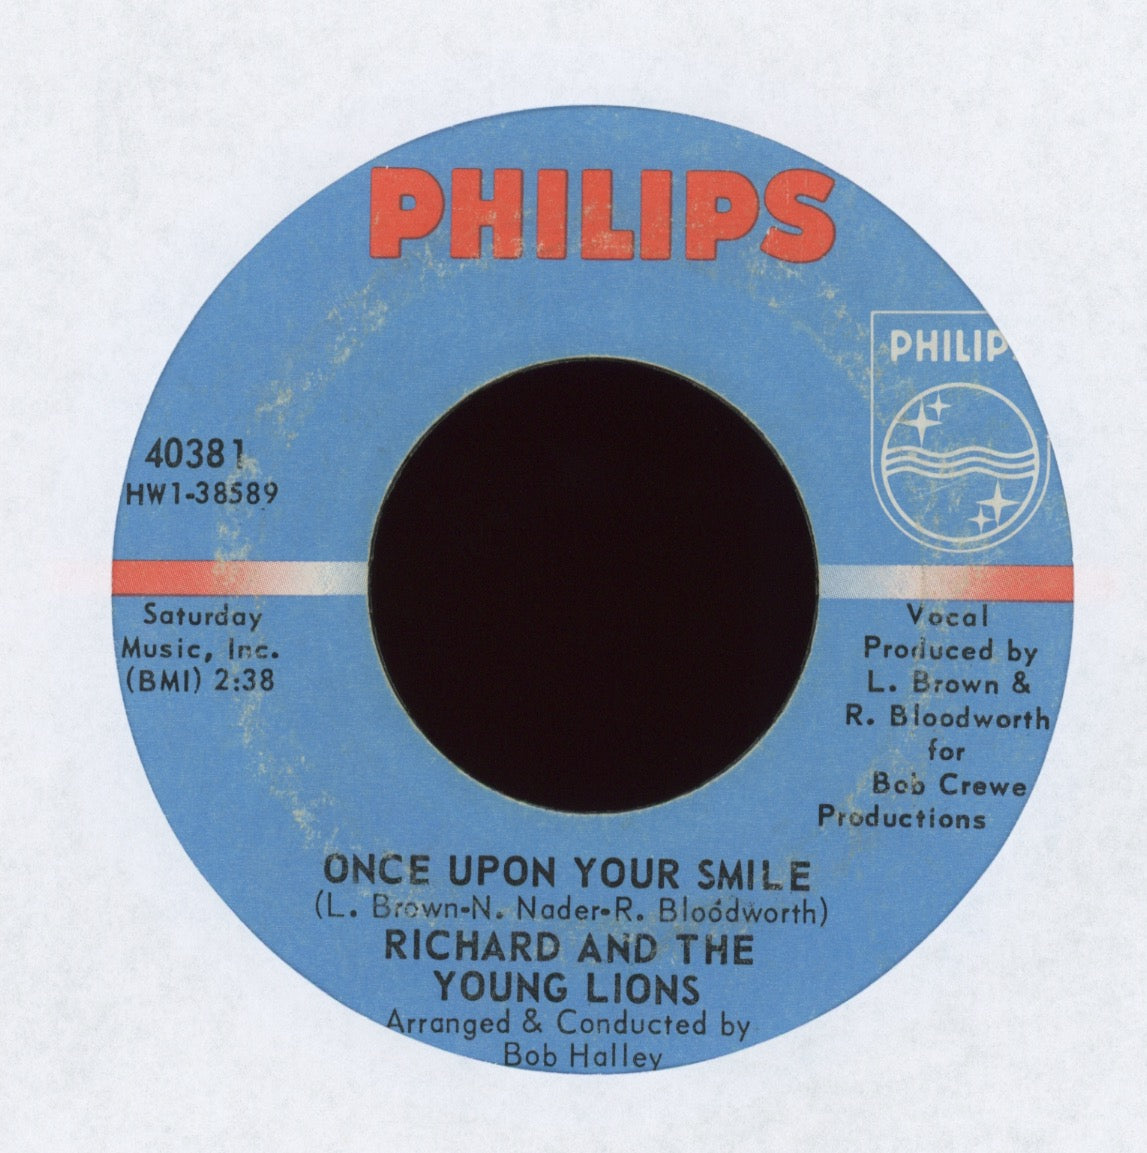 Richard & The Young Lions - Open Up Your Door on Philips